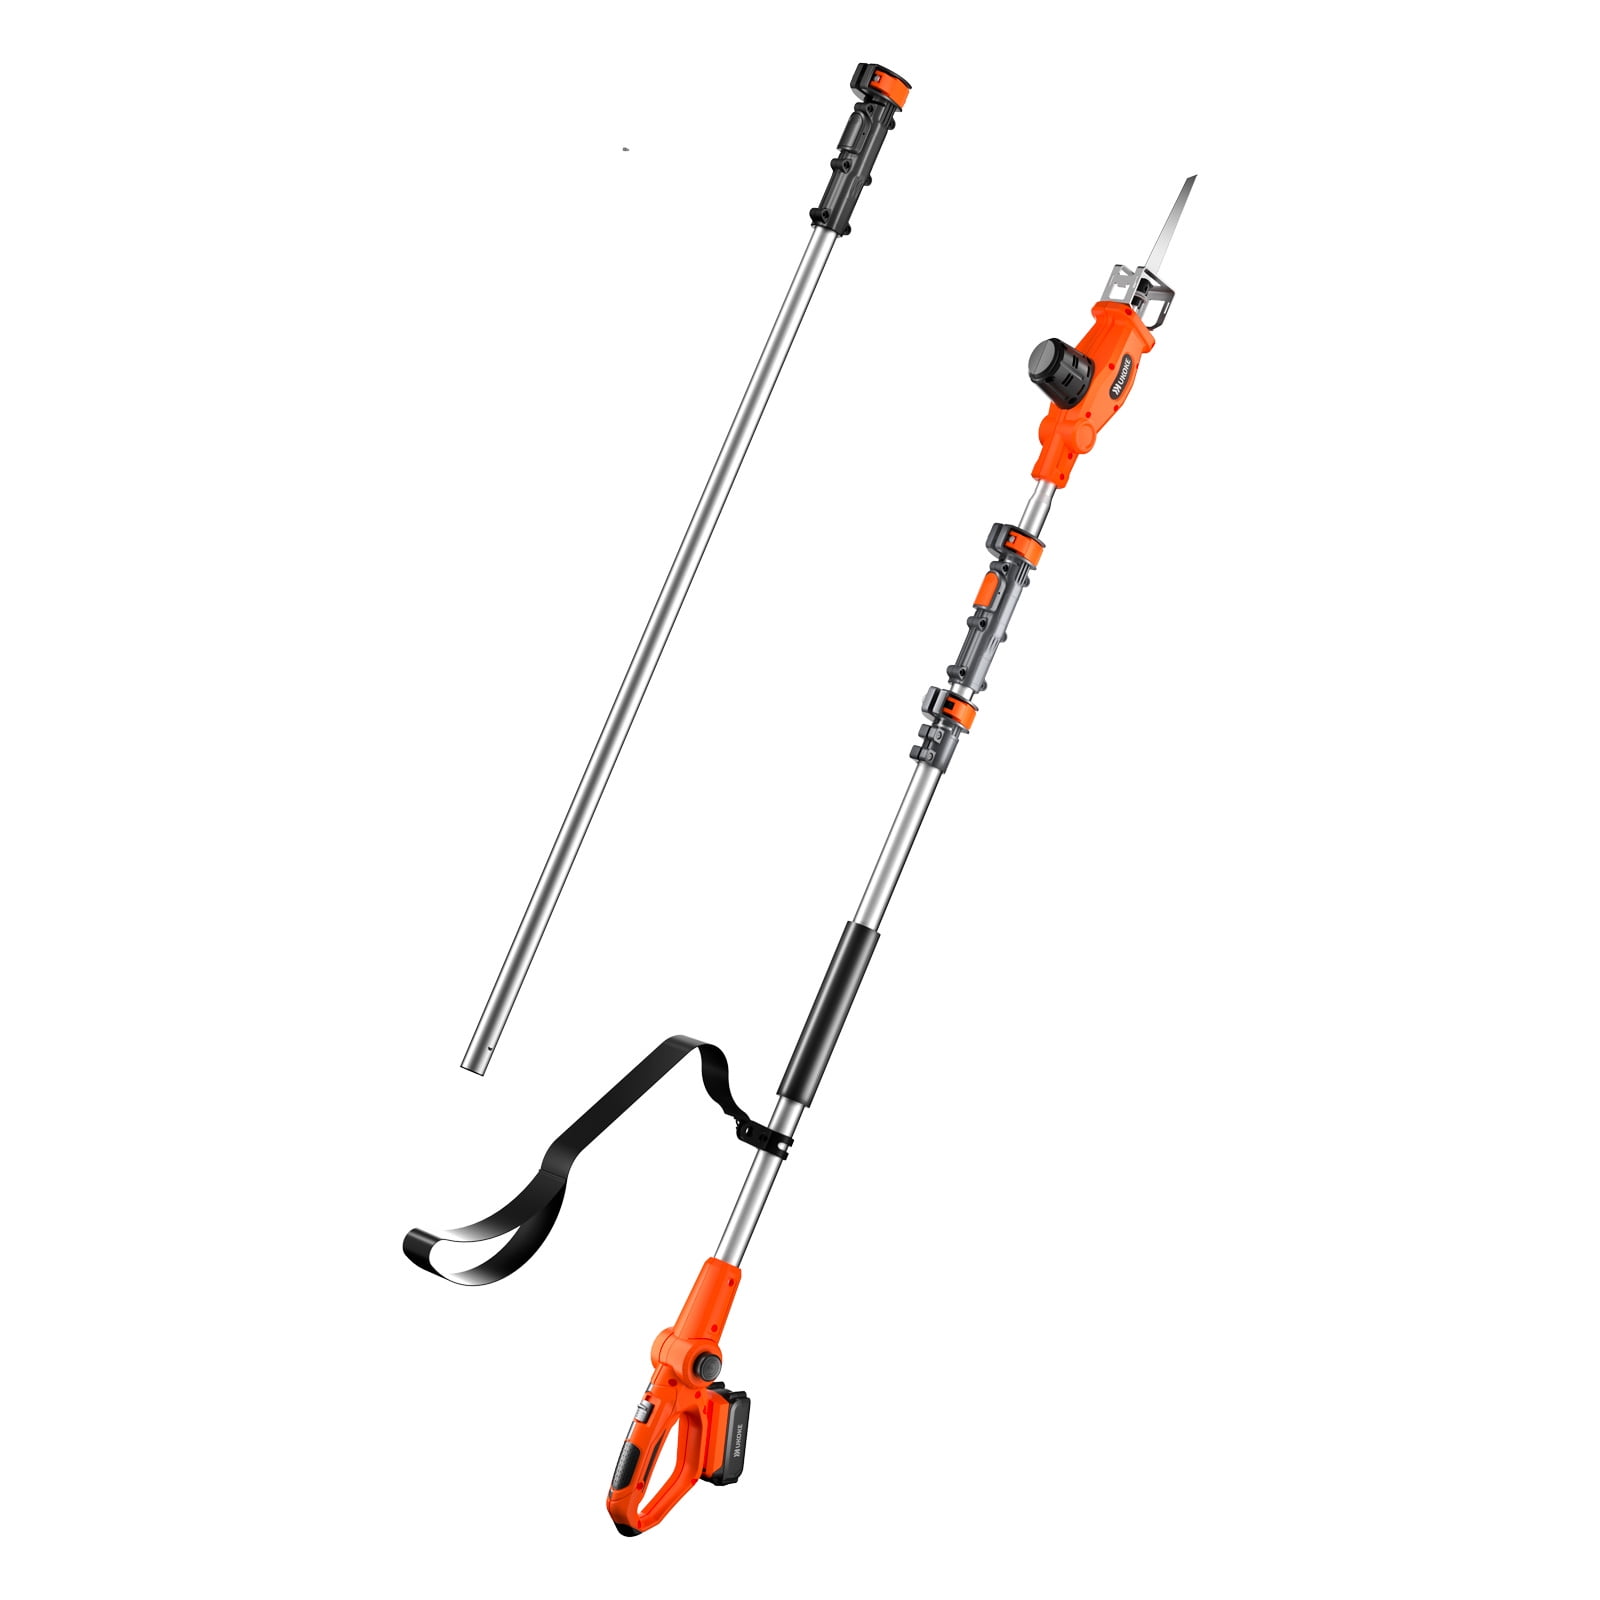 VEVOR 20V Cordless Hedge Trimmer, 18 inch Double-edged Steel Blade, Pole Hedge  Trimmer Kit 20V Battery, Fast Charger Included, 74-94 Telescoping Design  for High Branches